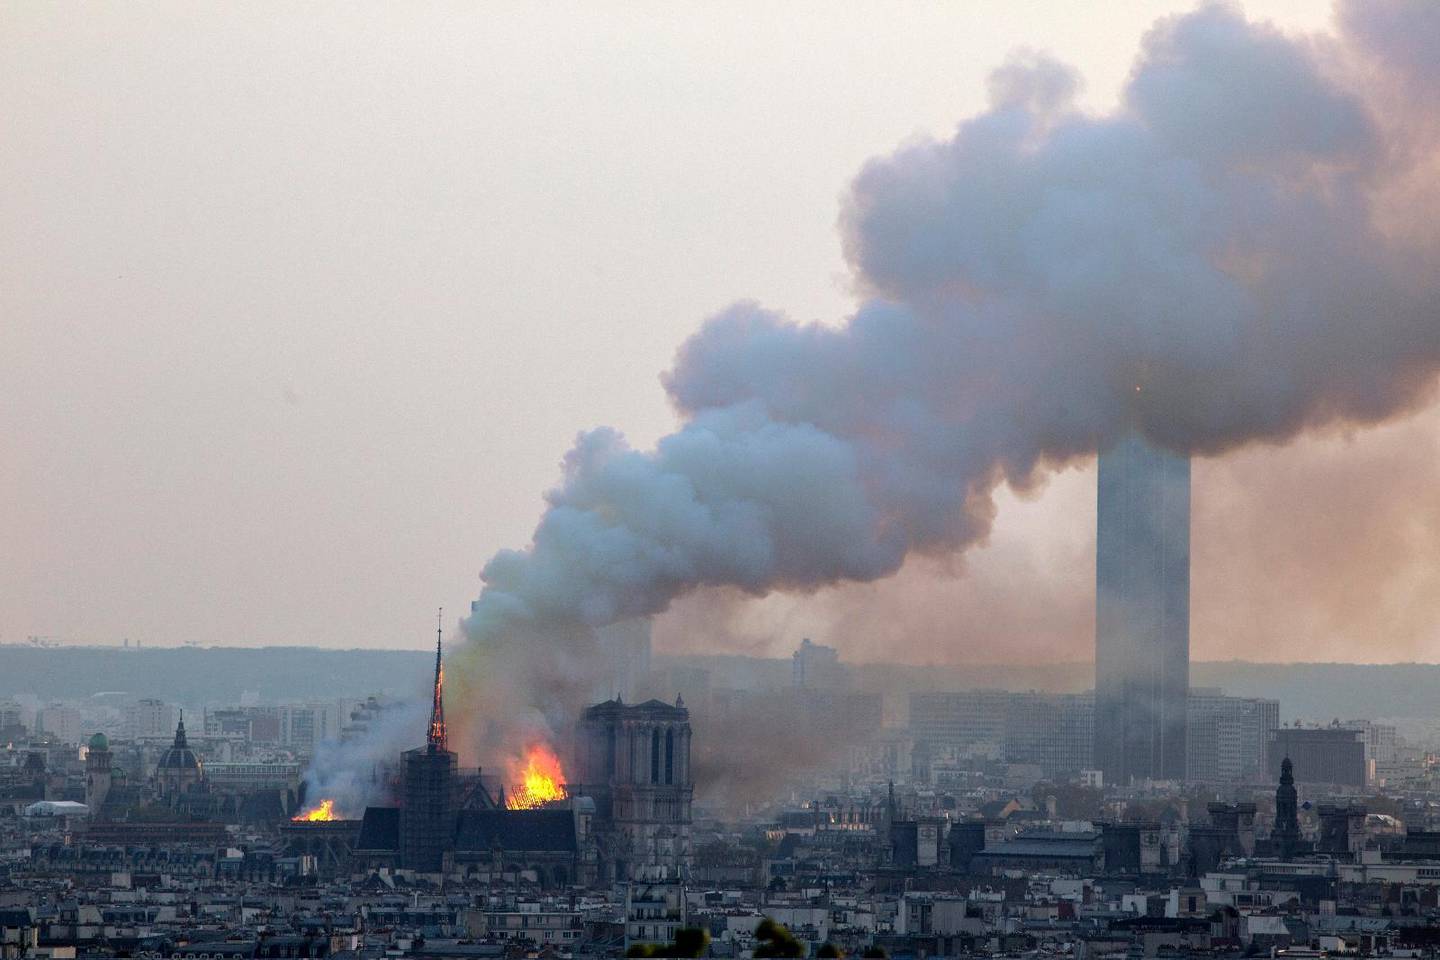 Notre Dame cathedral burning in Paris, Monday, April 15, 2019. Massive plumes of yellow brown smoke is filling the air above Notre Dame Cathedral and ash is falling on tourists and others around the island that marks the center of Paris. (AP Photo/Rafael Yaghobzadeh)